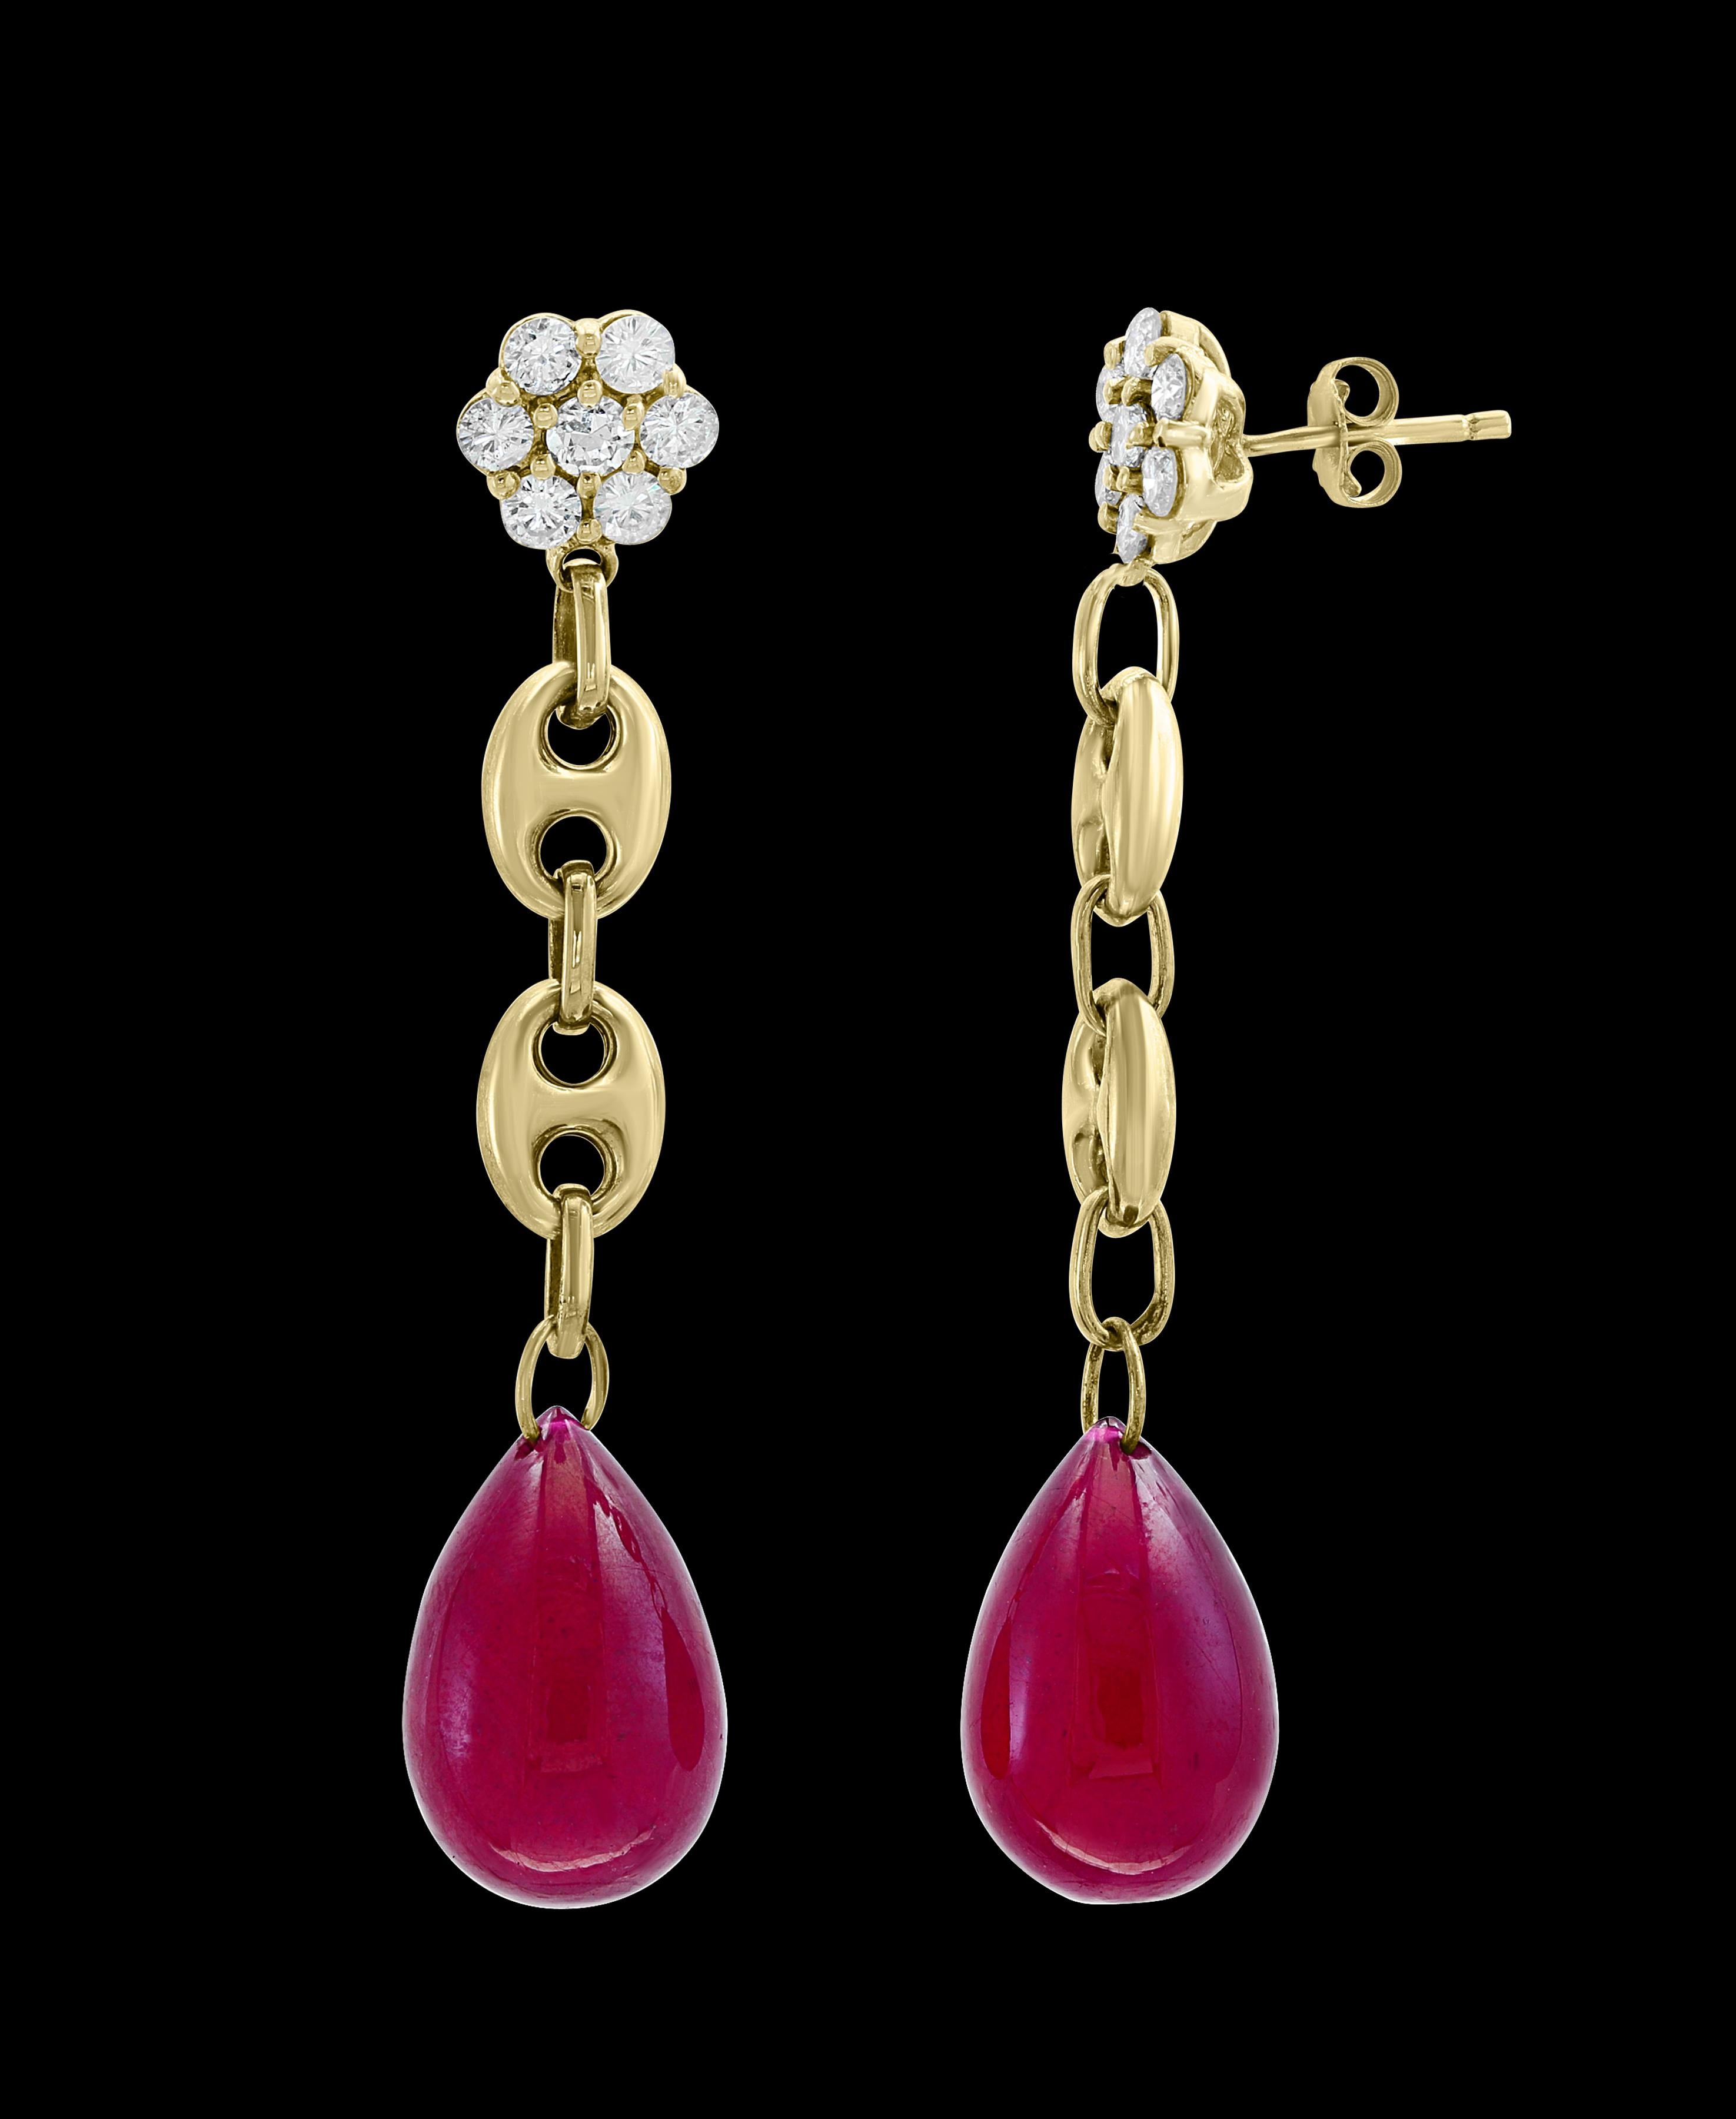 Oval Cut 45 Carat Ruby Drop and Diamond Hanging/Chandelier Earrings 14 Karat Yellow Gold For Sale